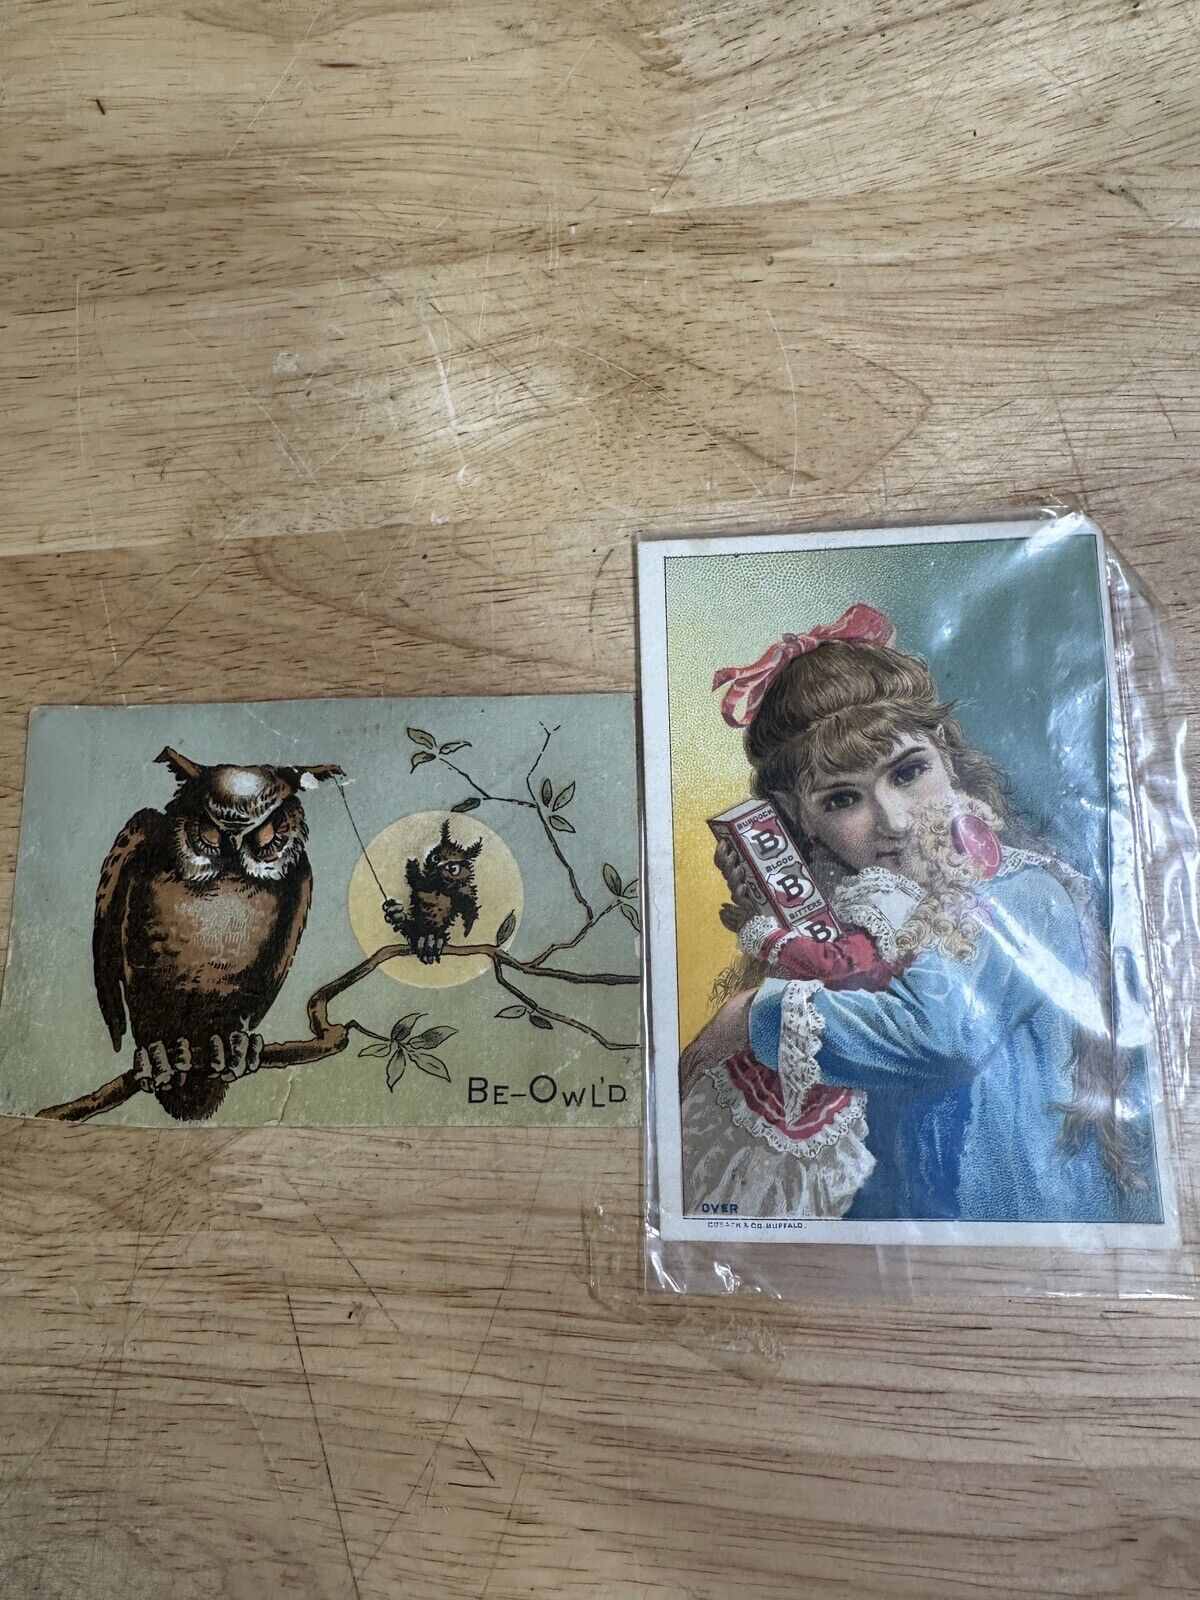 Antique Pair Of Victorian Trade Cards Blood Bitters/Be-Owl’d